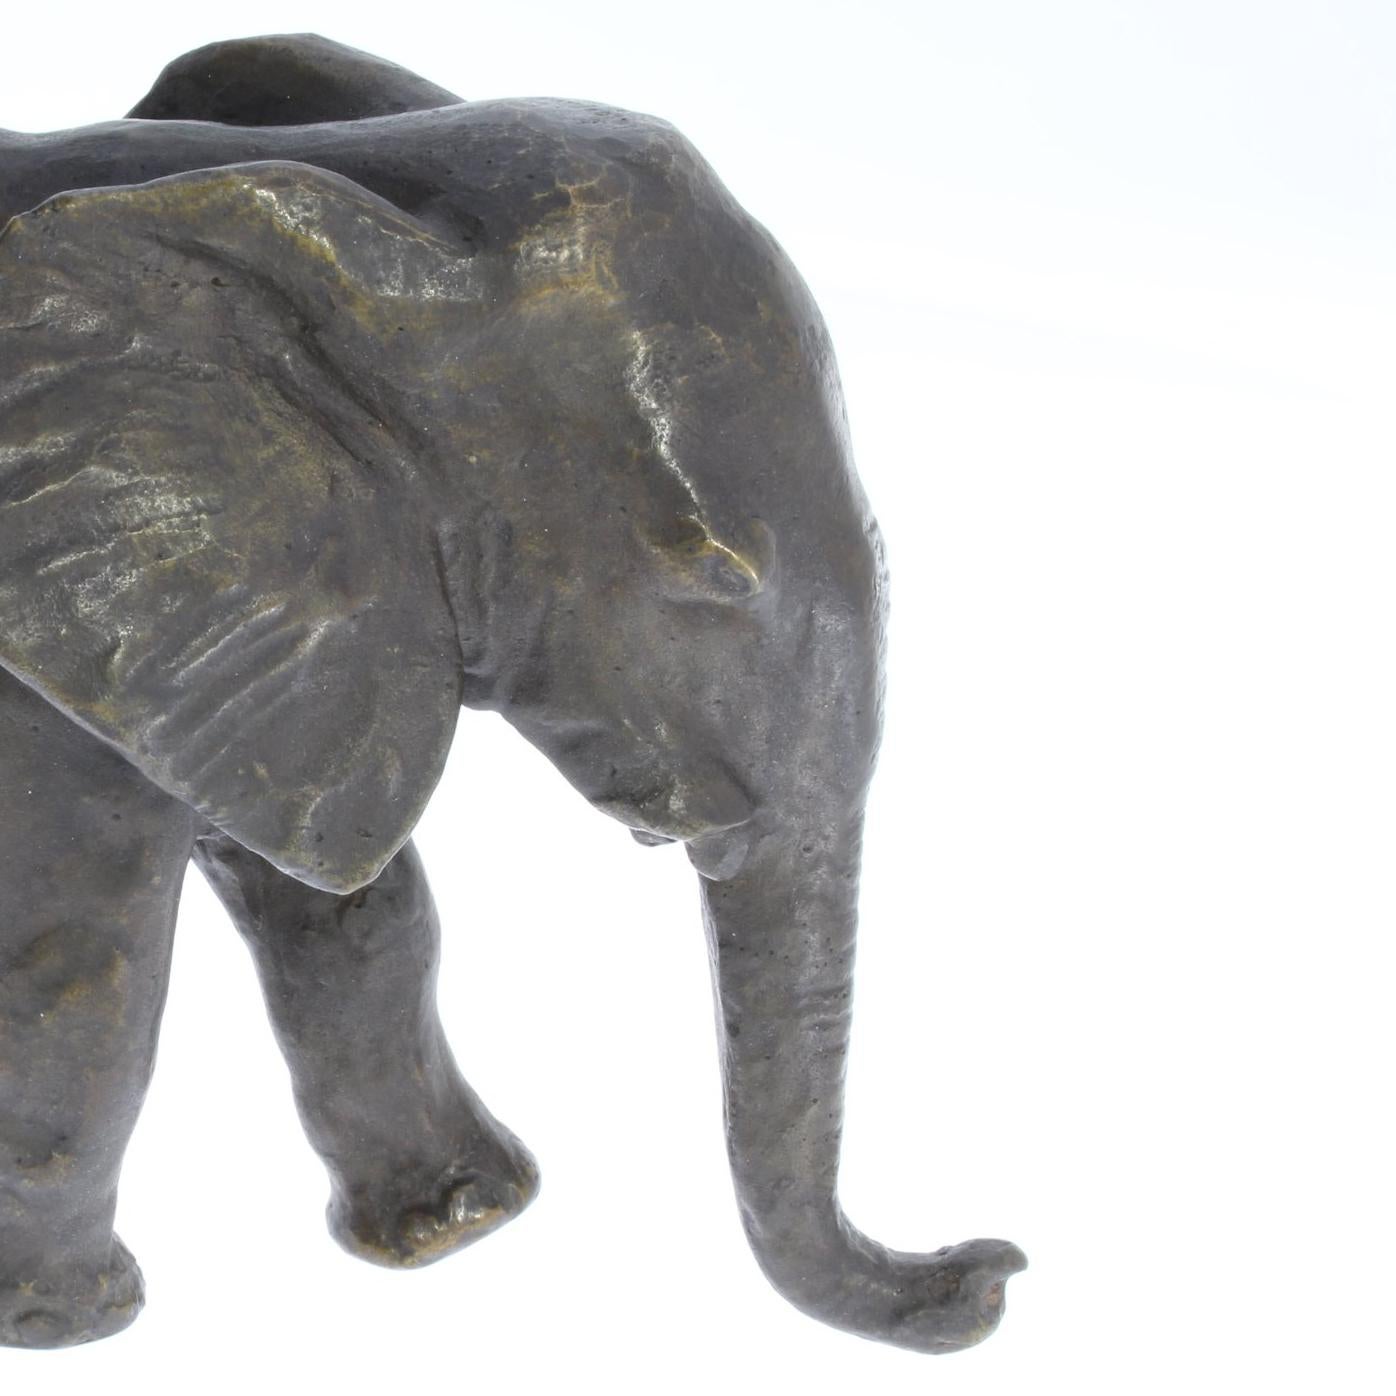 Sculpture conceived in 1926 by Renée Sintenis ( 1888-1965 ). Bronze with brown patina. On hind foot monogramed: RS
Dimensions; Height: 3.54 in ( 9 cm ), Width: 5.31 in ( 13,5 cm ) 
